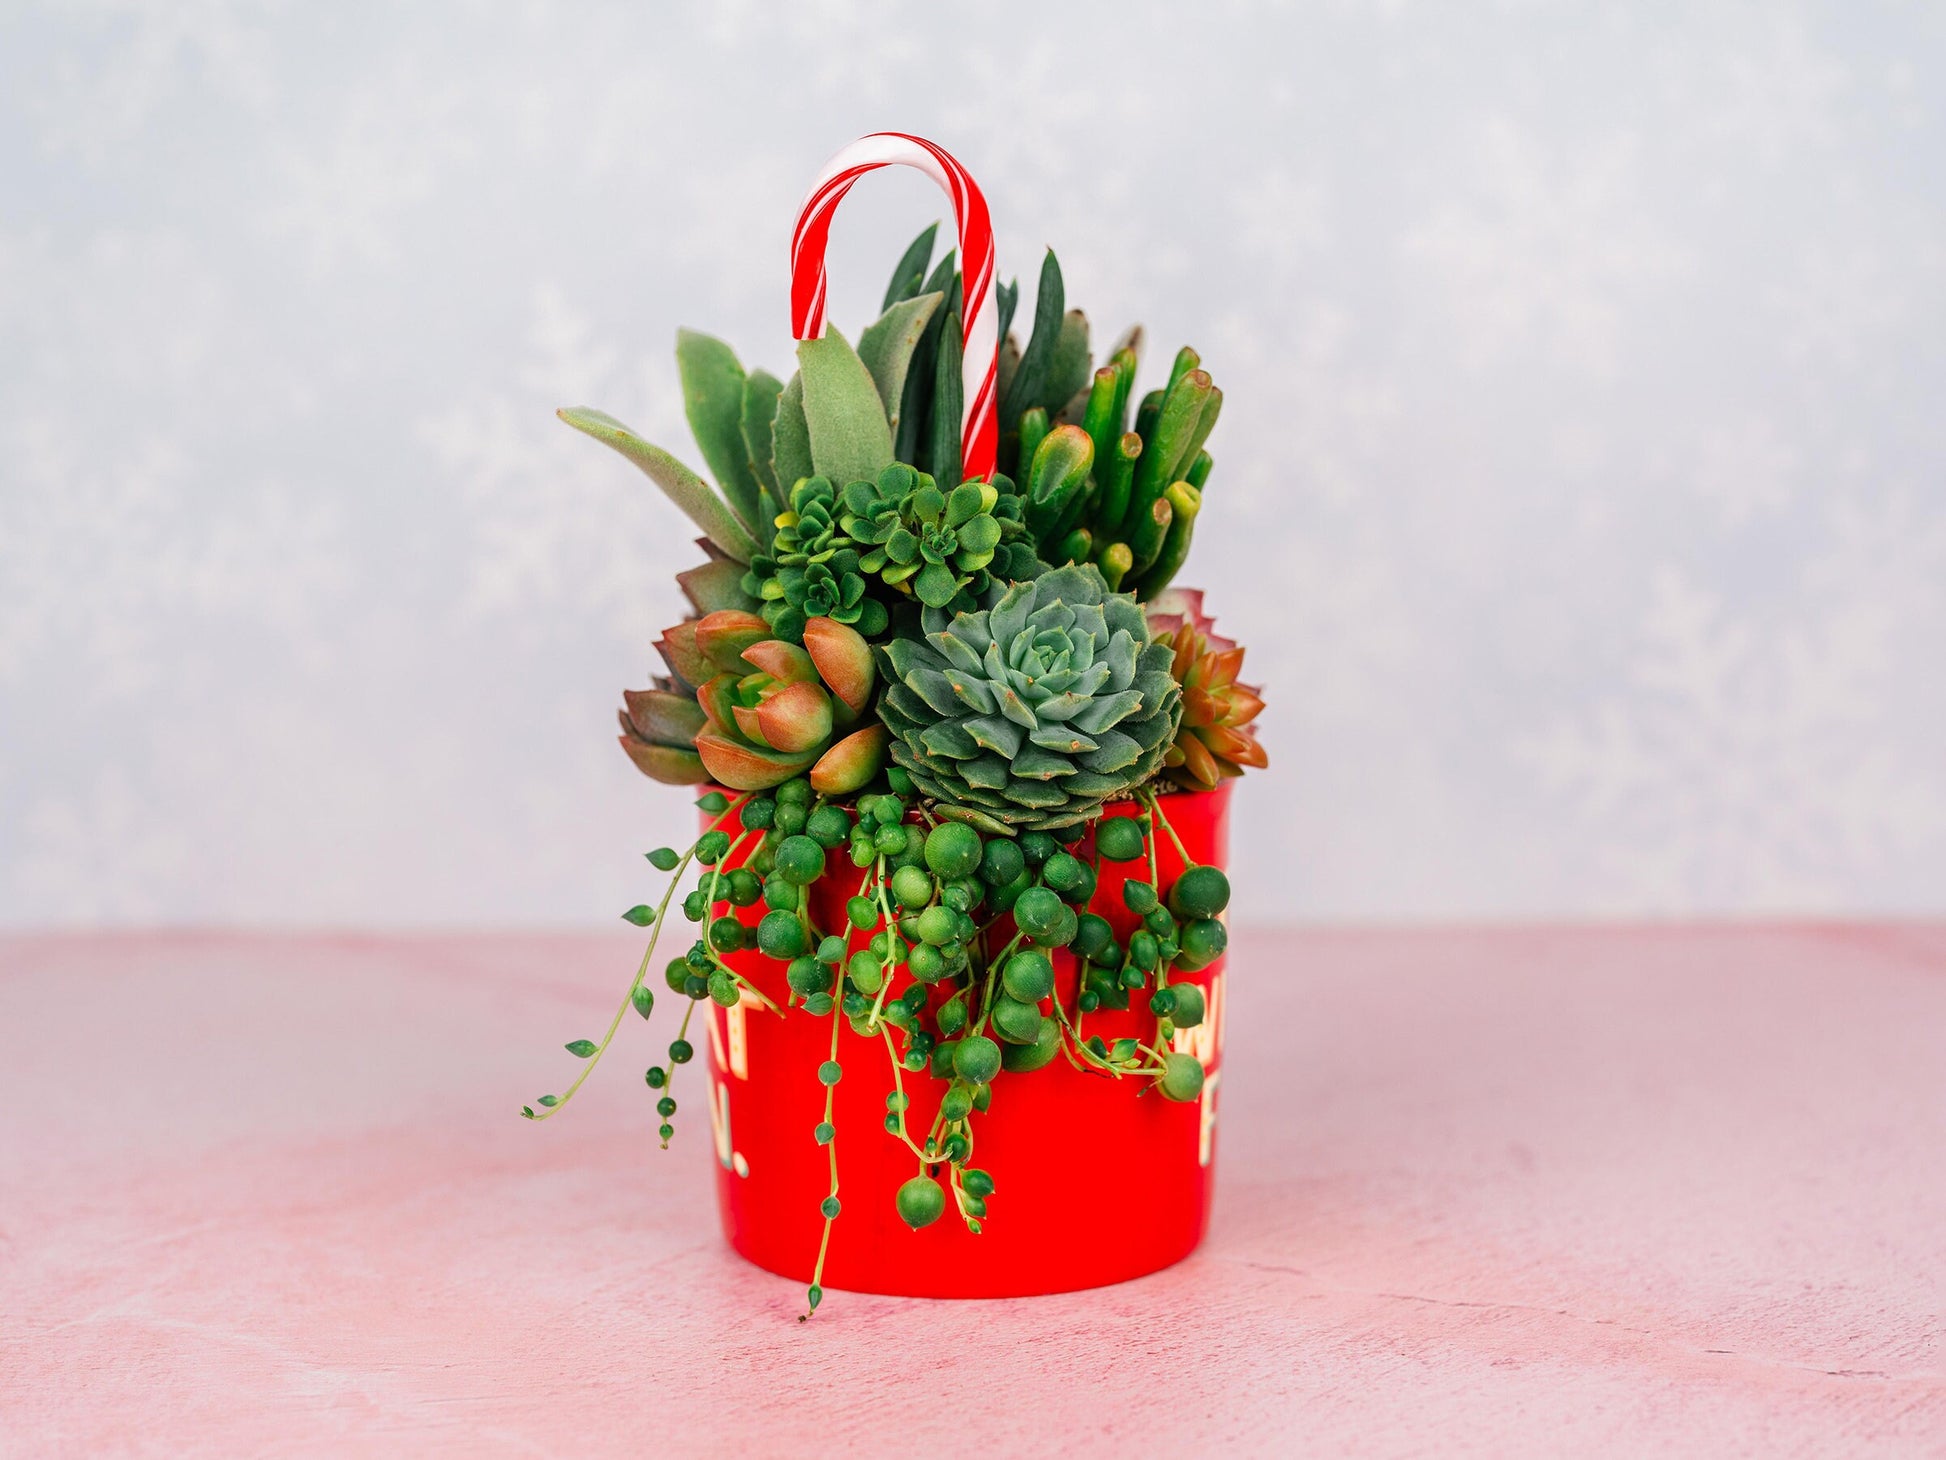 Red Candy Cane Christmas Mug Succulent Holiday Arrangement- Oh What Fun- Bursting with Living Succulents for Holiday Gift or Home Decor